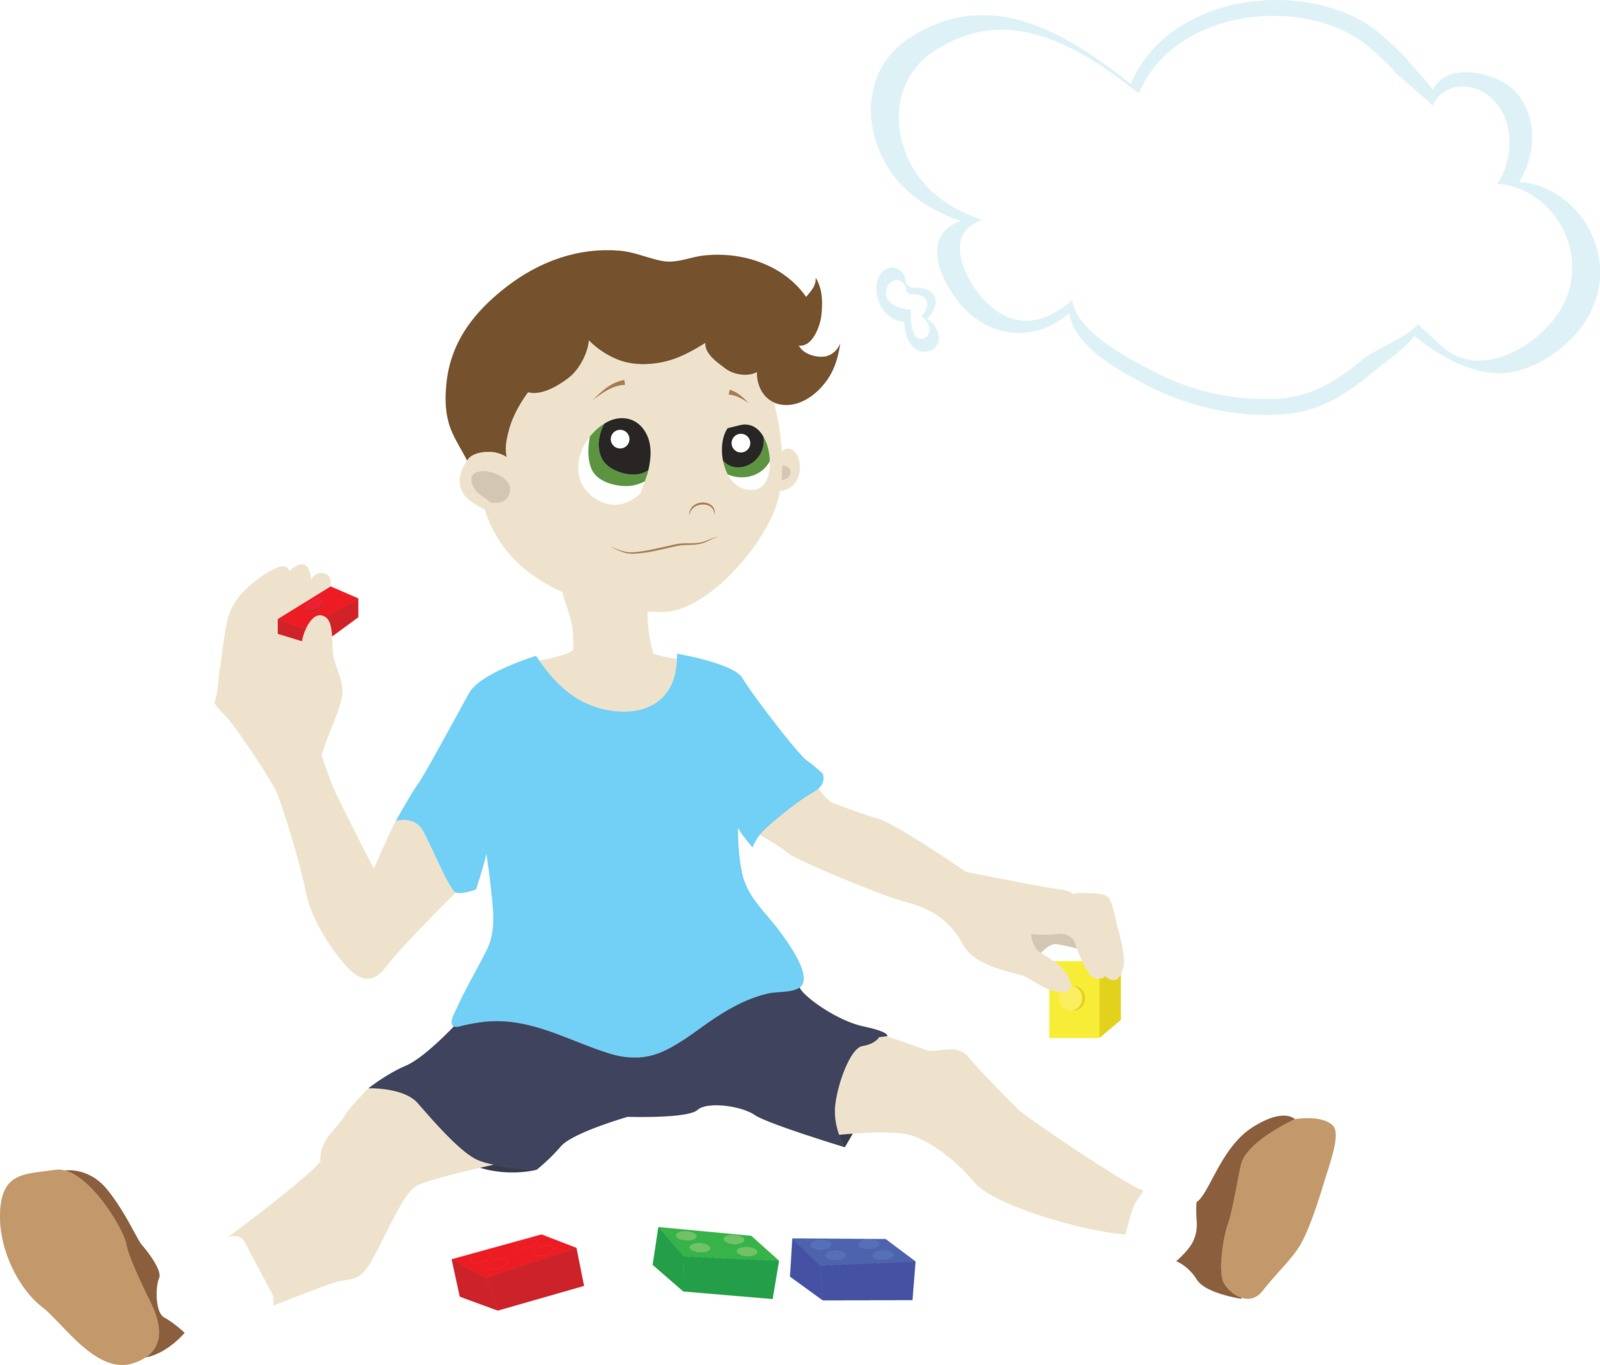 Illustration of a boy who is sitting on the floor with the designer and thinks that he wants to build